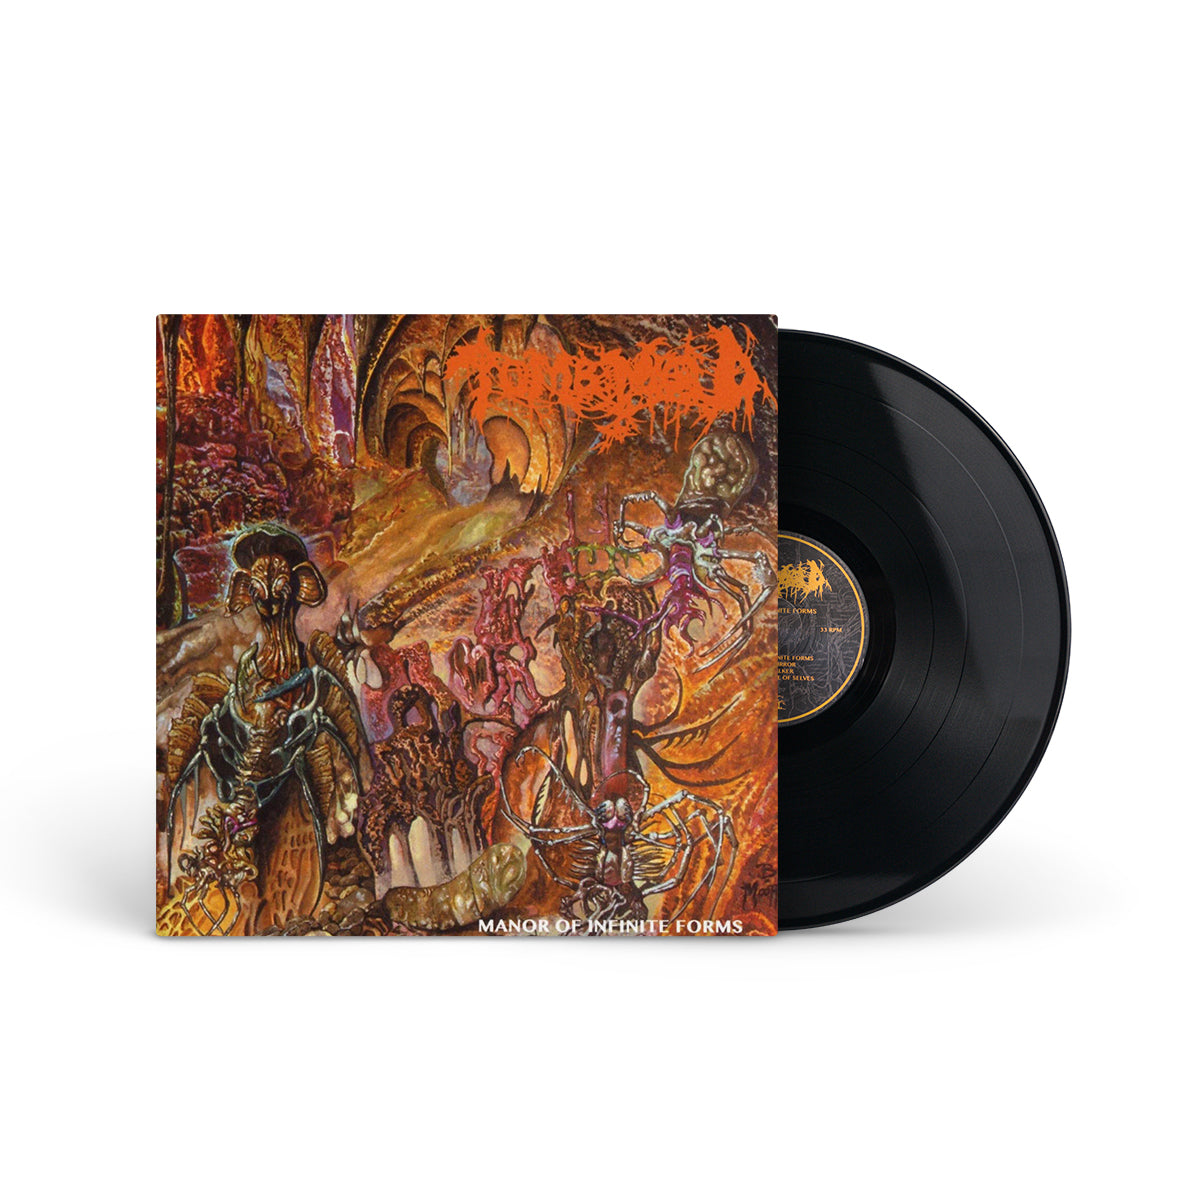 TOMB MOLD "Manor Of Infinite Forms" LP